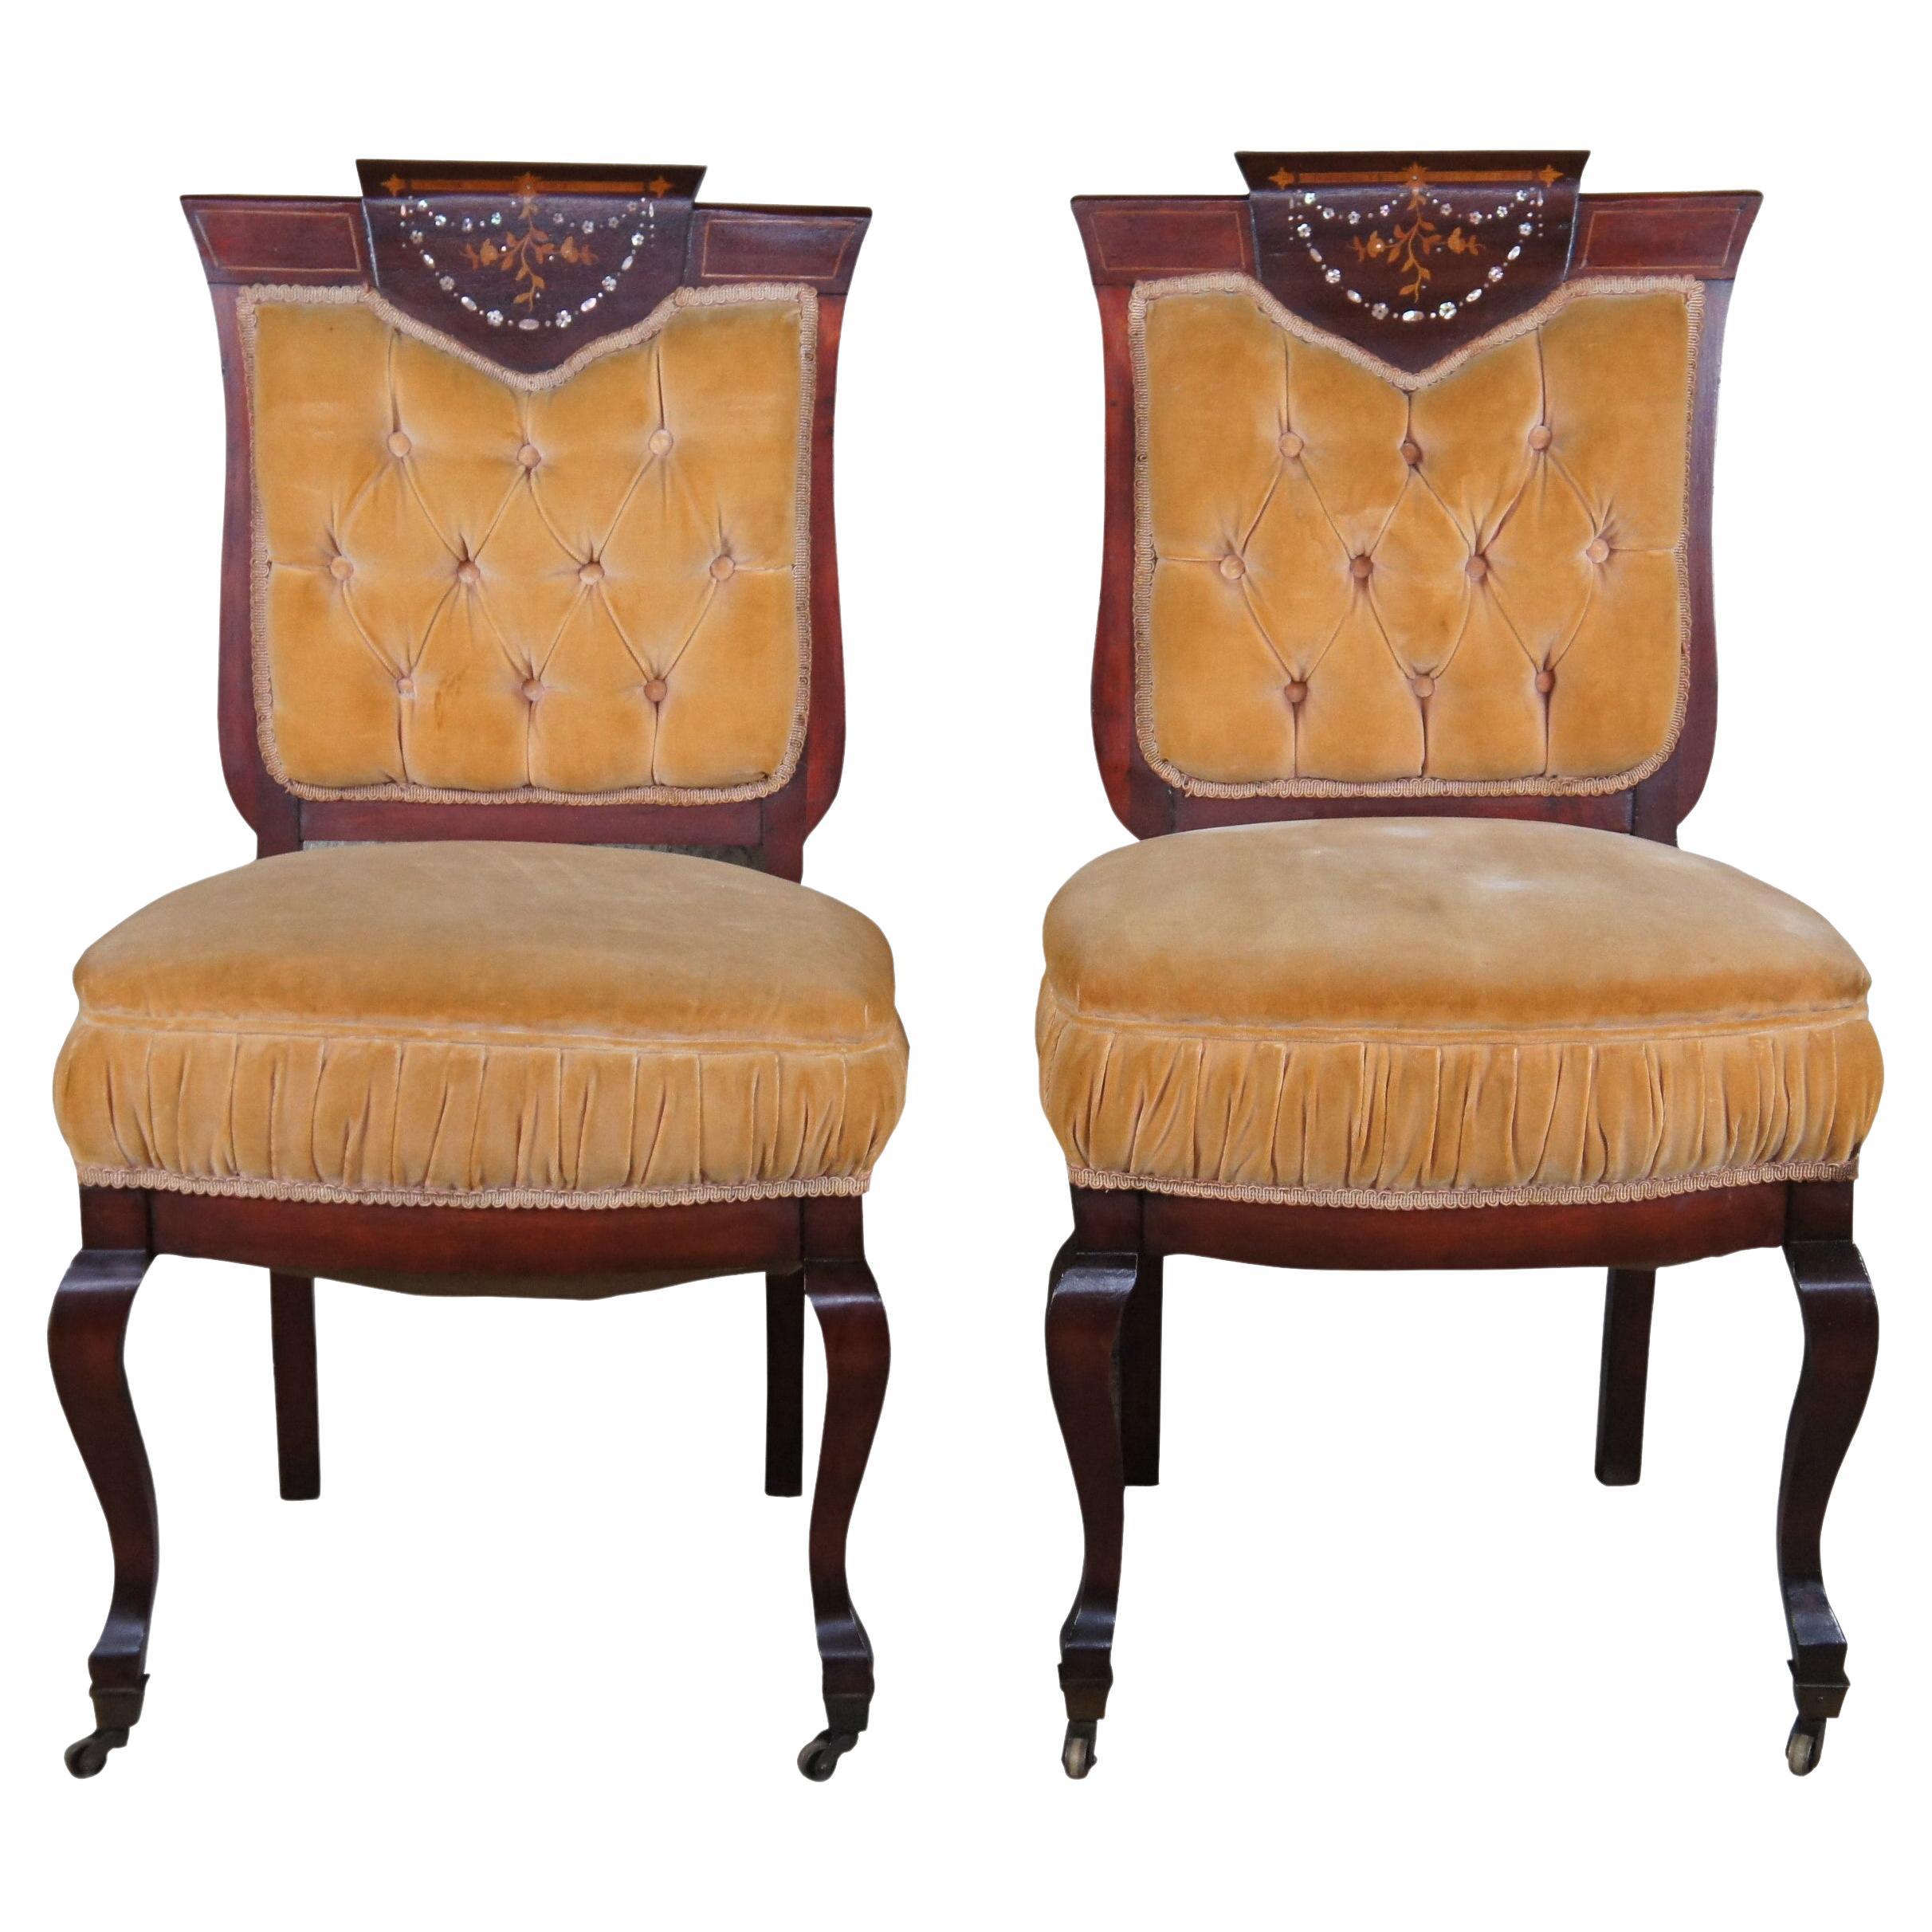 2 Antique Edwardian Mahogany Chairs Marquetry Mother of Pearl Tufted Shield Back